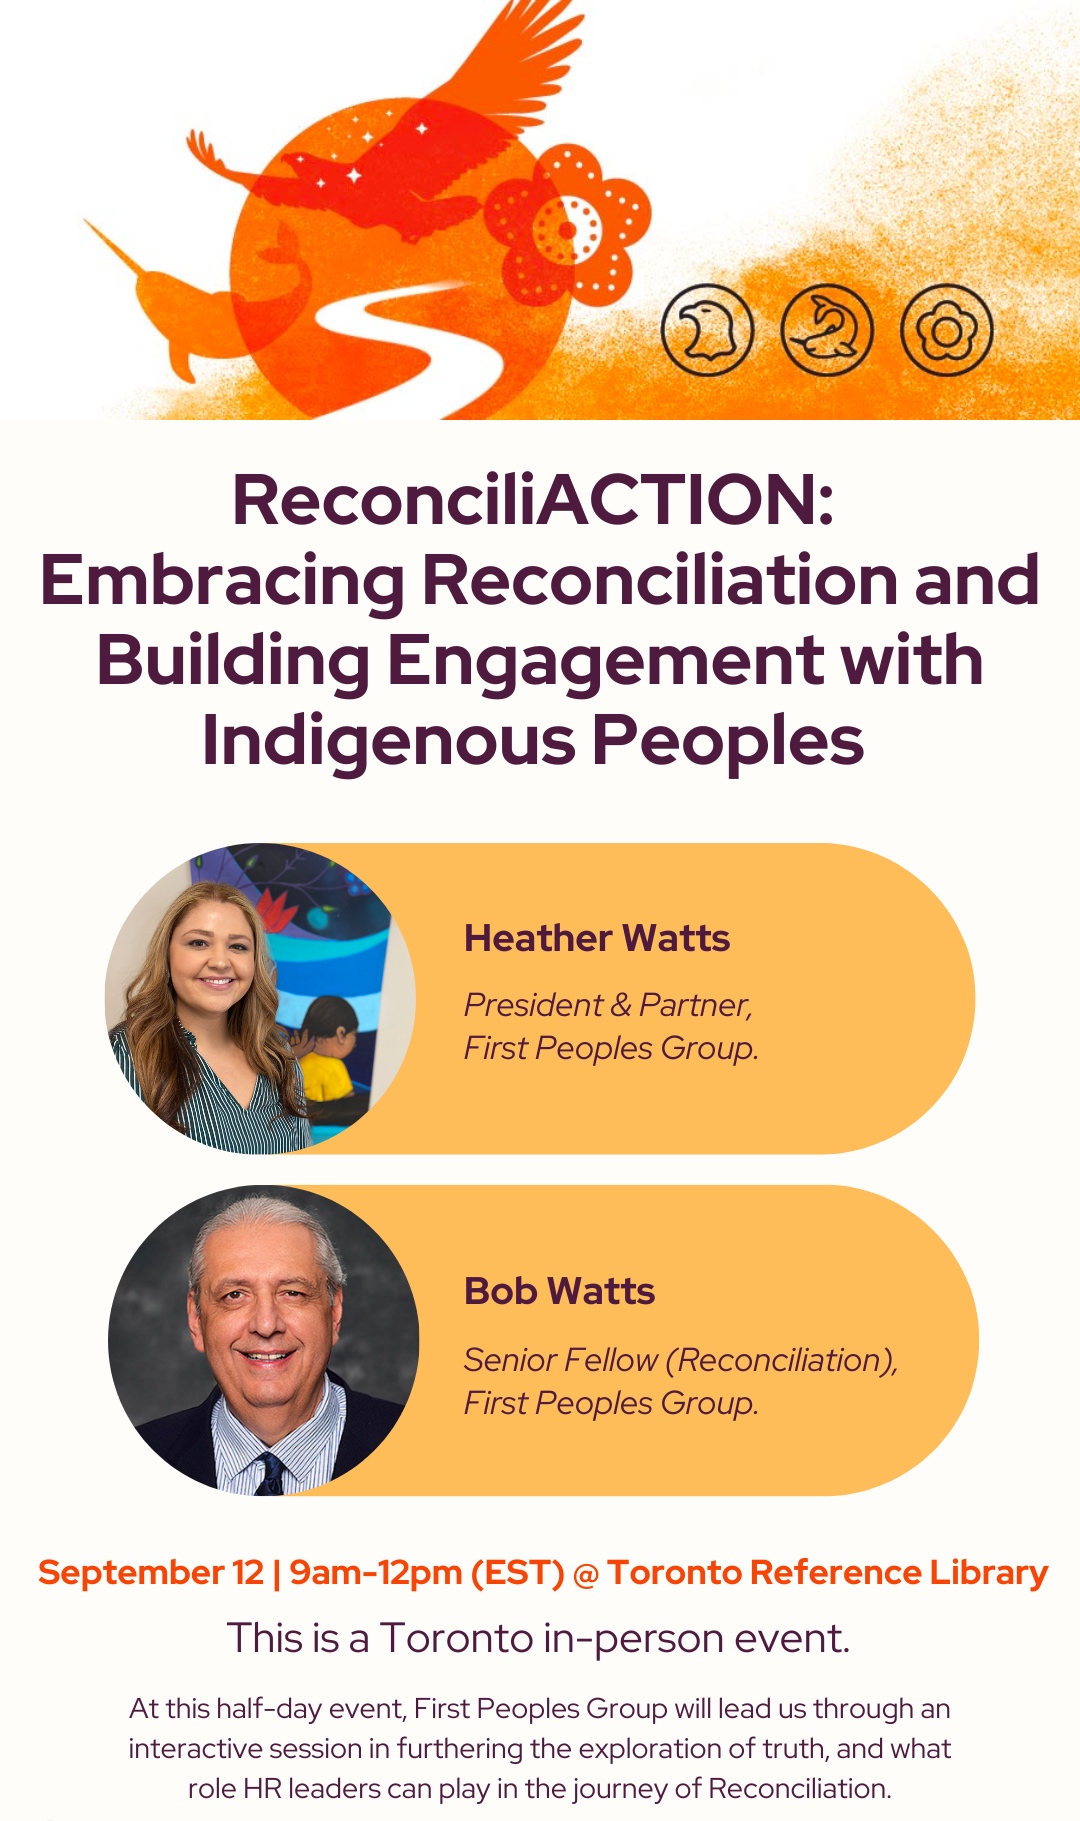 This is a Toronto in-person event. At this half day event, First Peoples Group will lead us through an interactive session in furthering the exploration of truth, and what role HR leaders can play in the journey of Reconciliation.